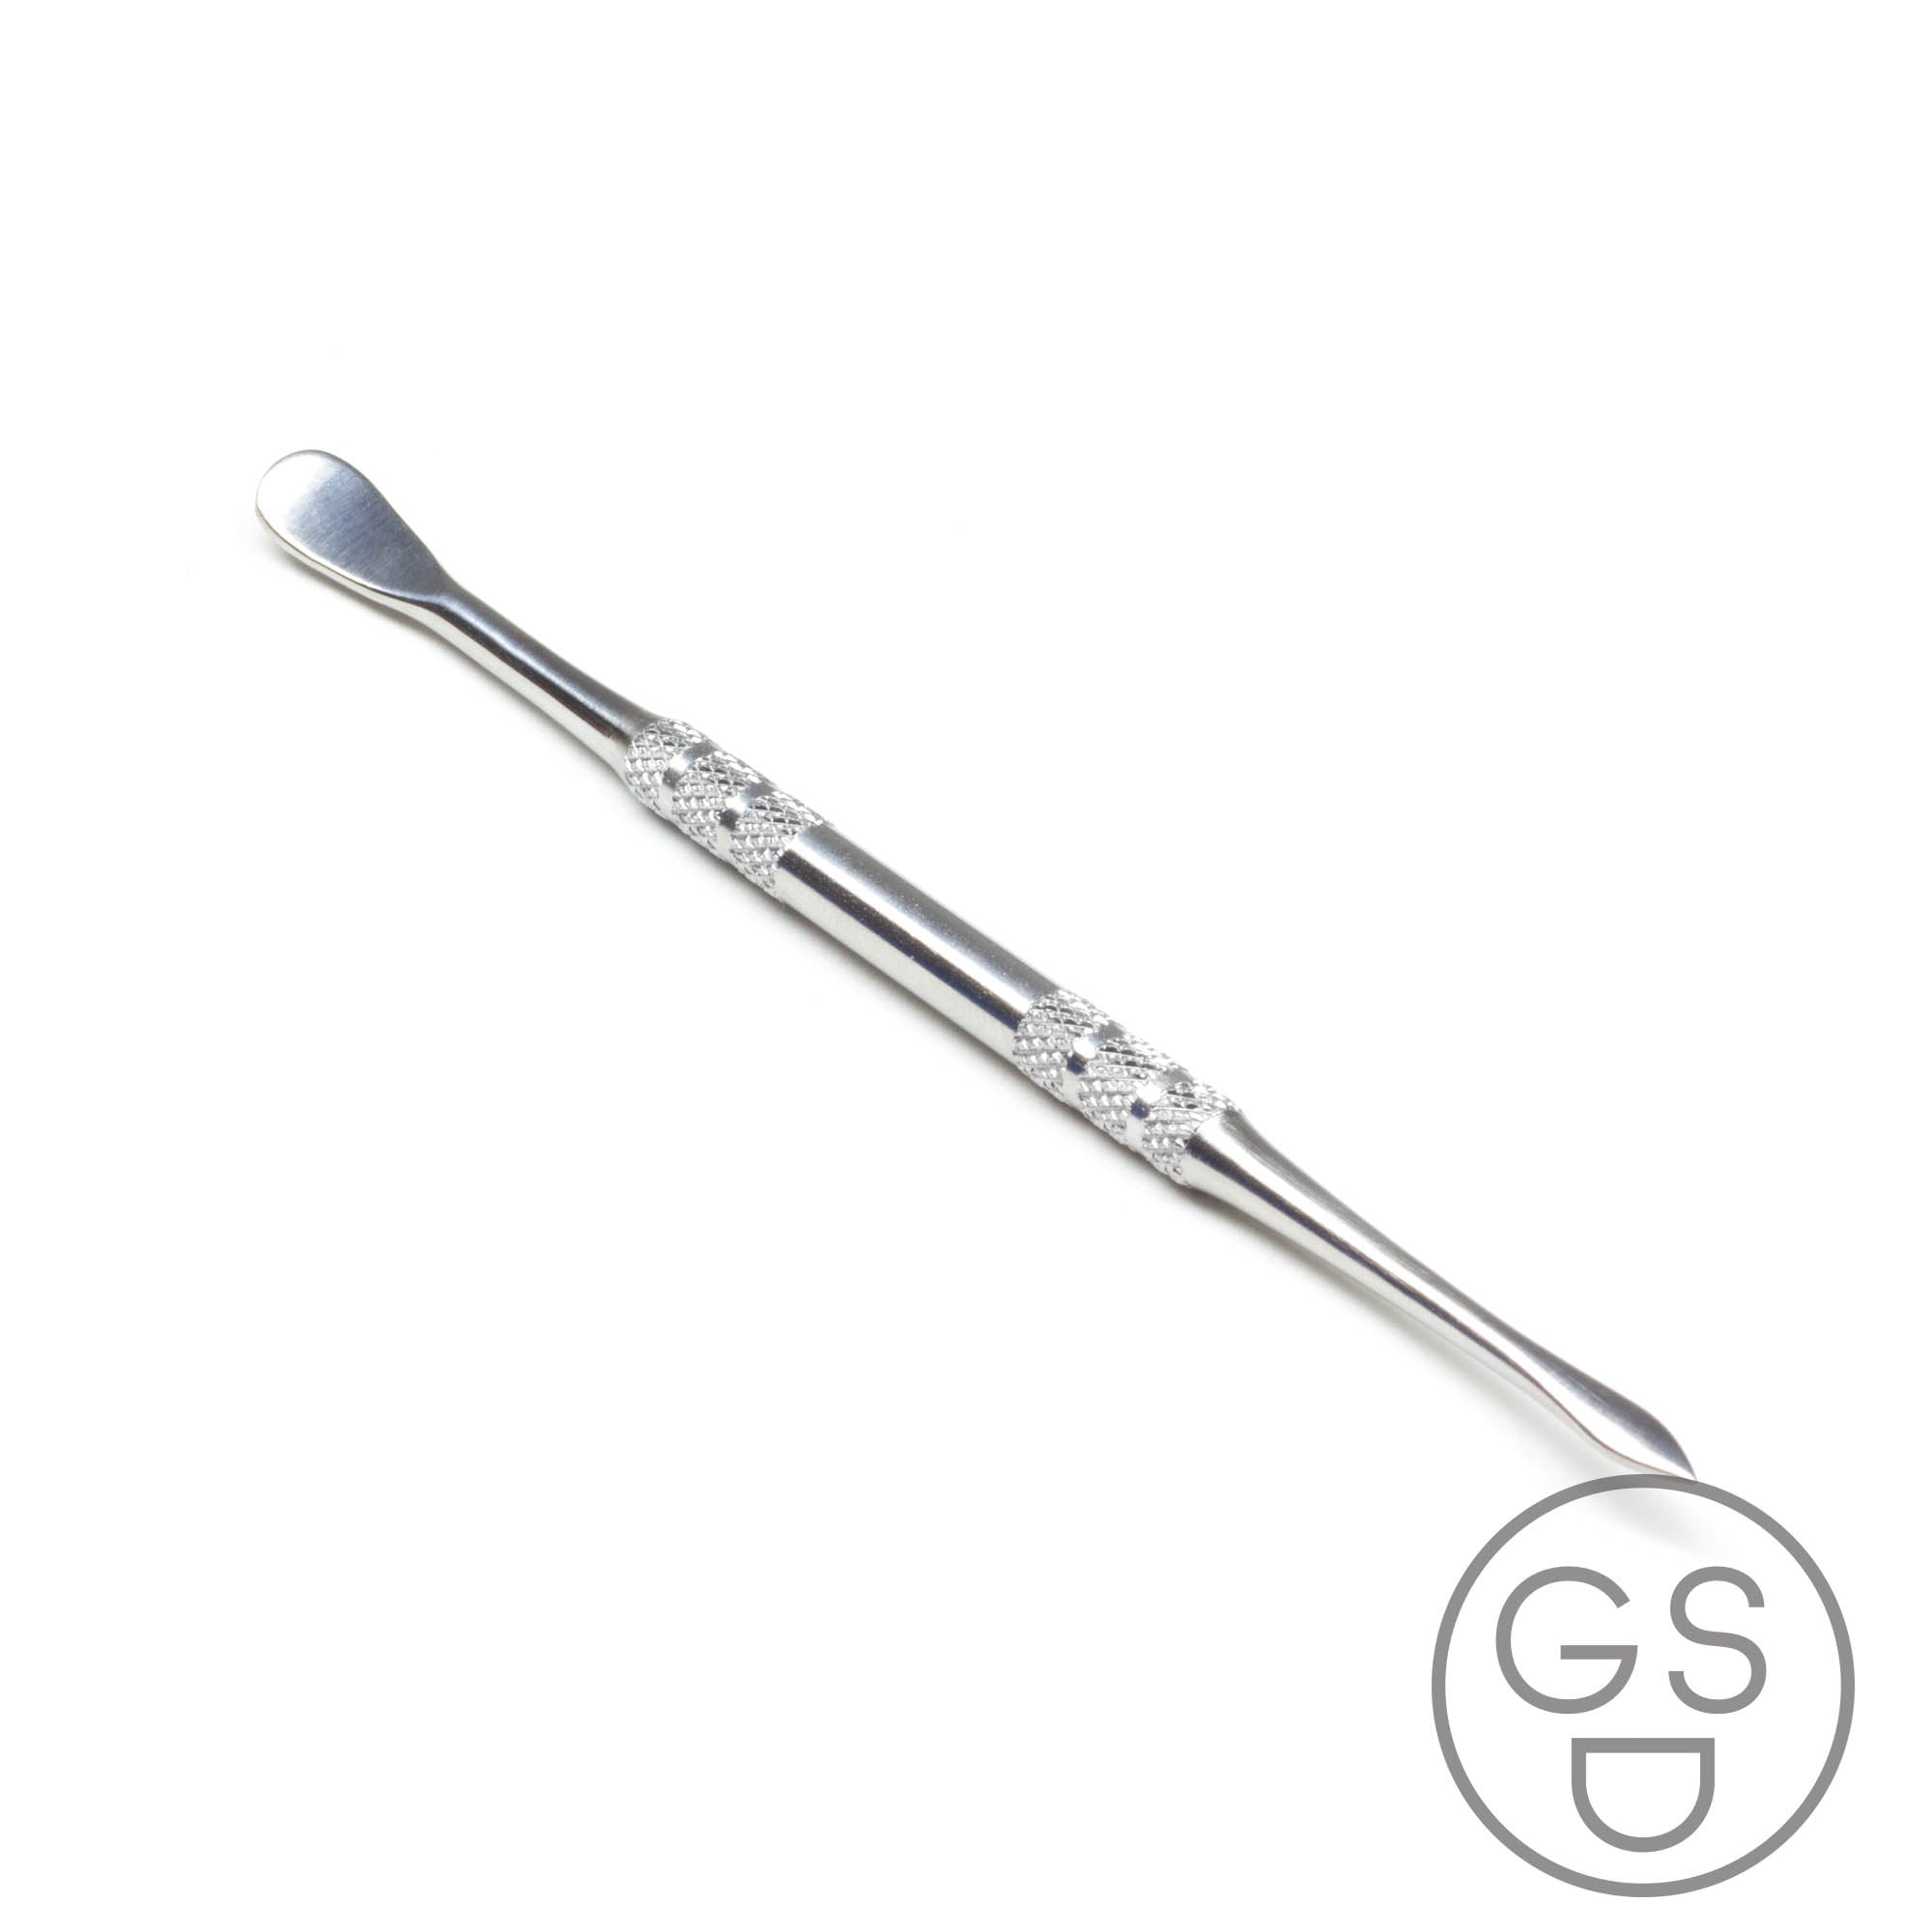 Concentrate Tool - Spoon and Spear